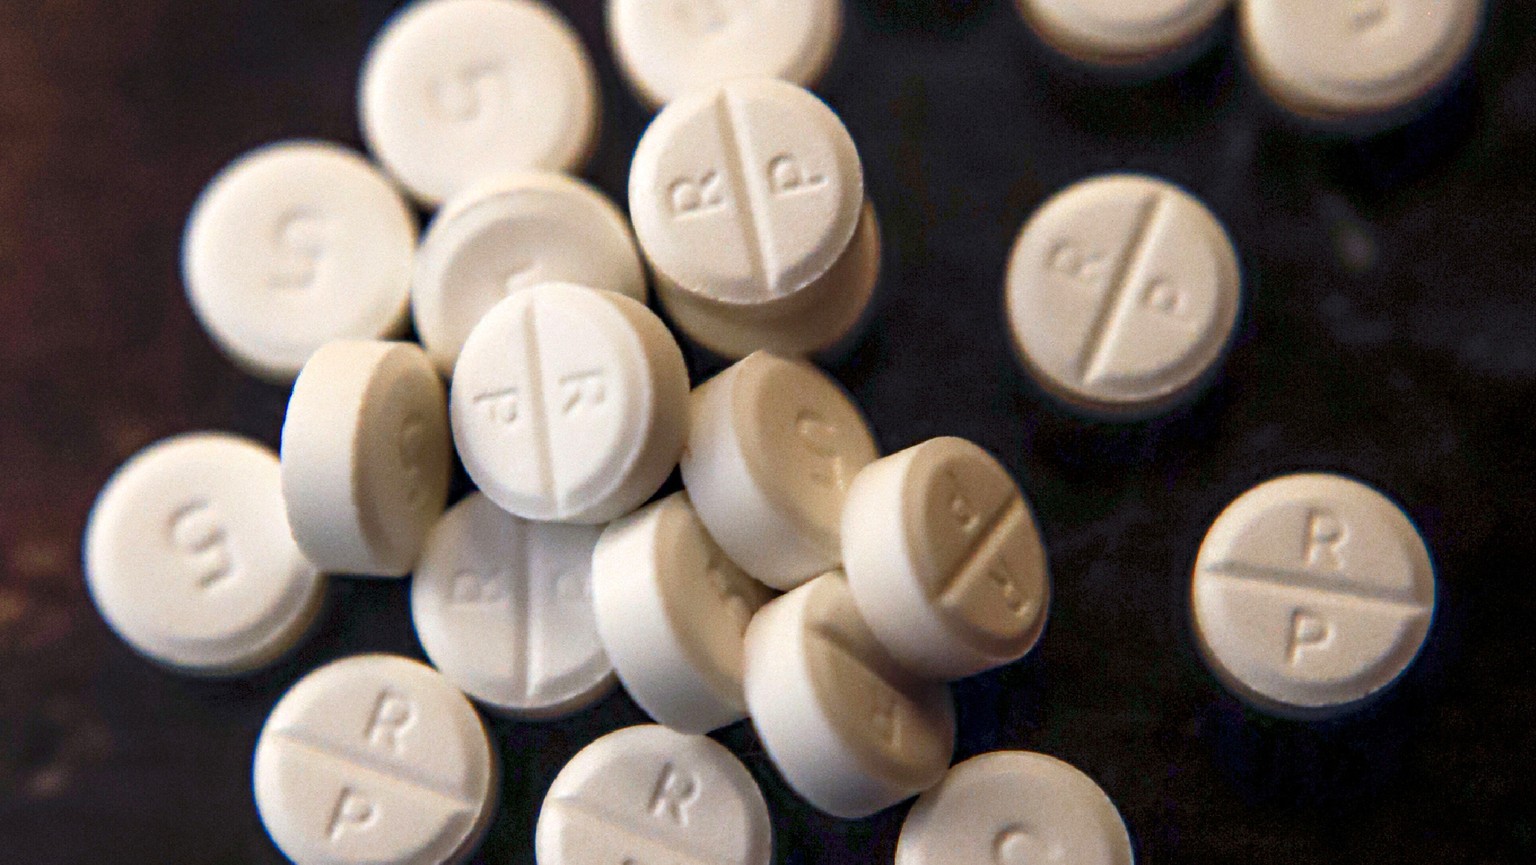 FILE - This June 17, 2019, file photo shows 5-mg pills of Oxycodone. Lawsuits filed by two Ohio counties against retail pharmacy chains claiming their opioid dispensing practices flooded communities w ...